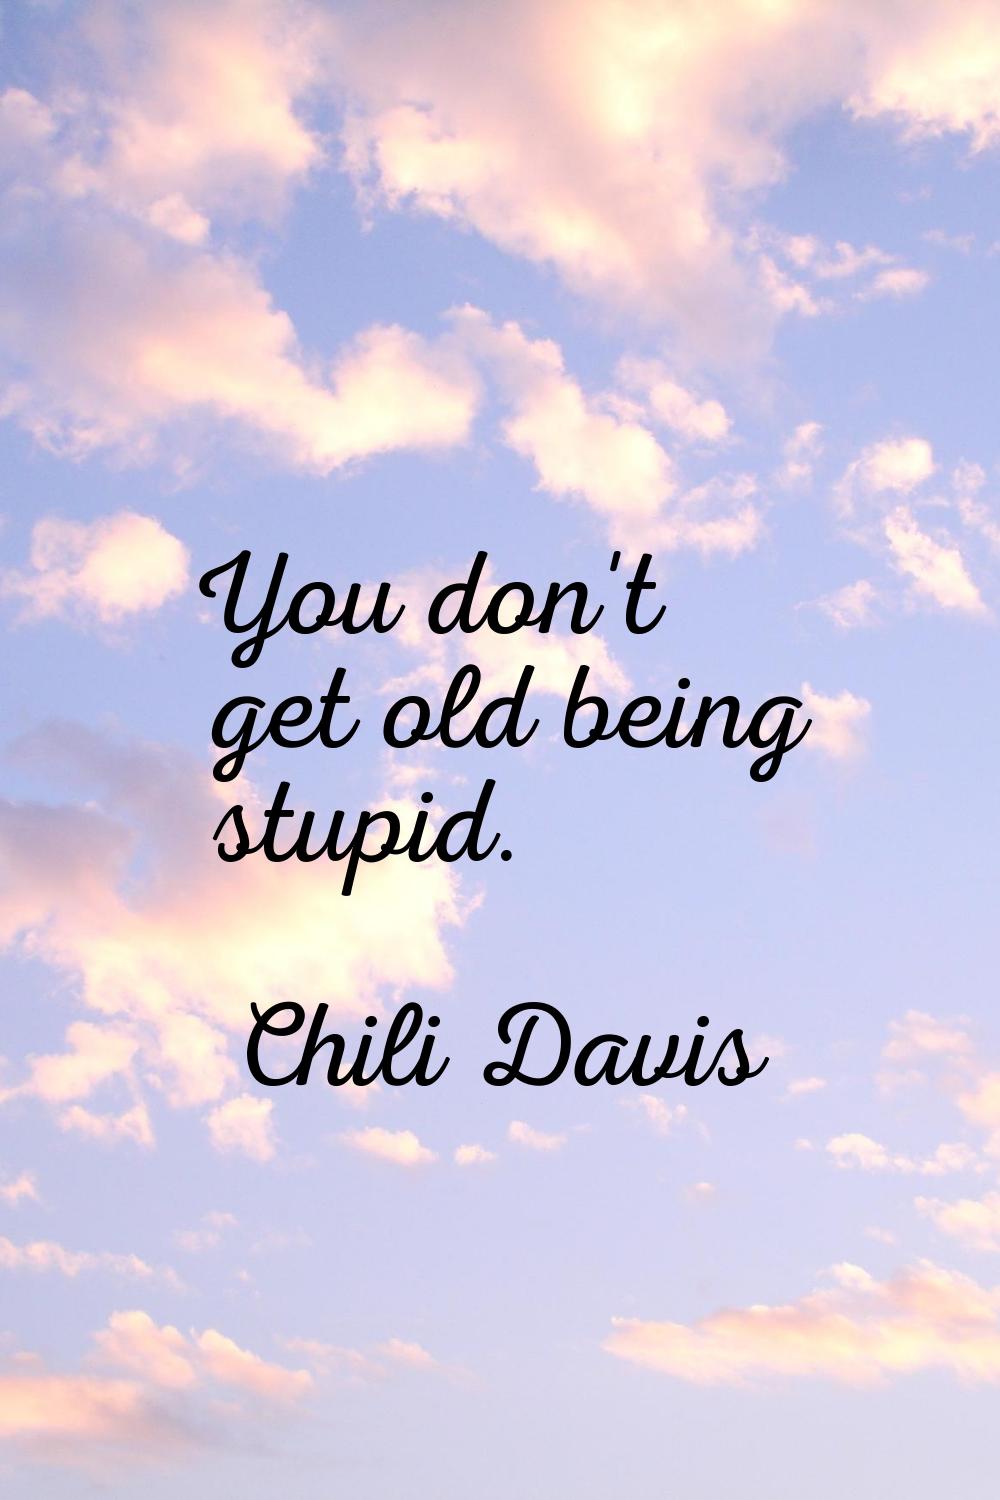 You don't get old being stupid.